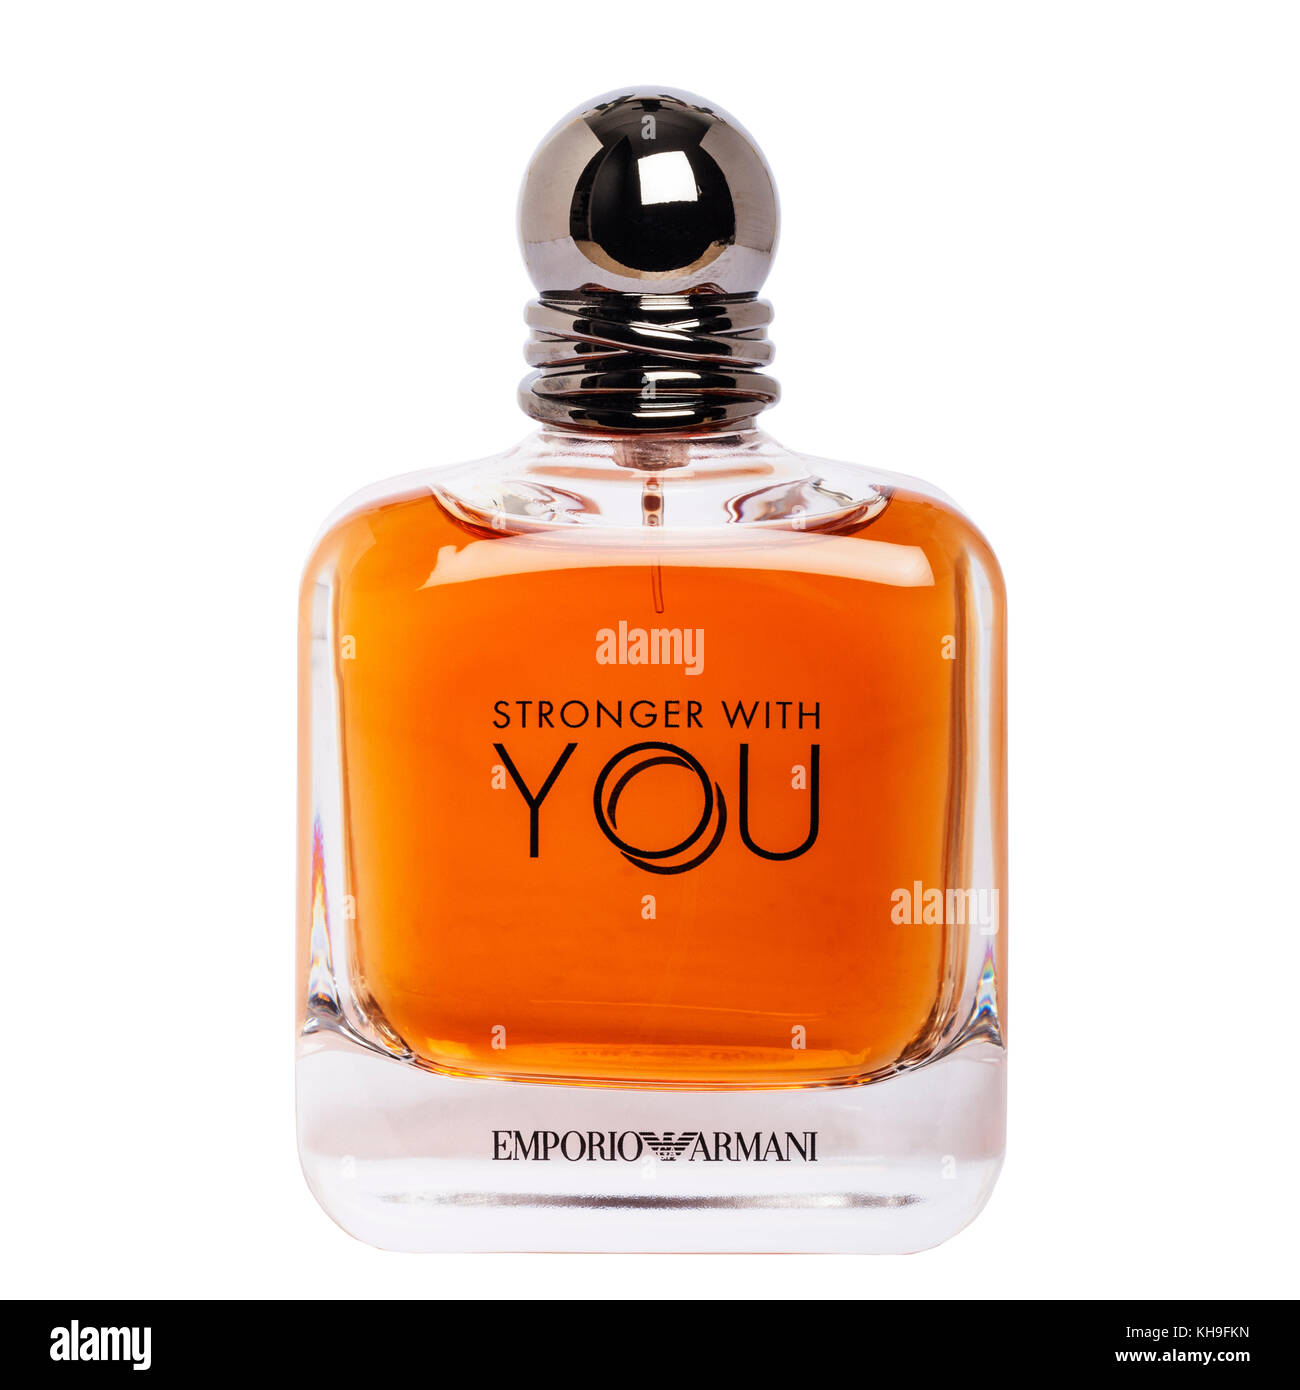 A bottle of designer mens aftershave,stronger with you by Emporio Armani on a white background Stock Photo